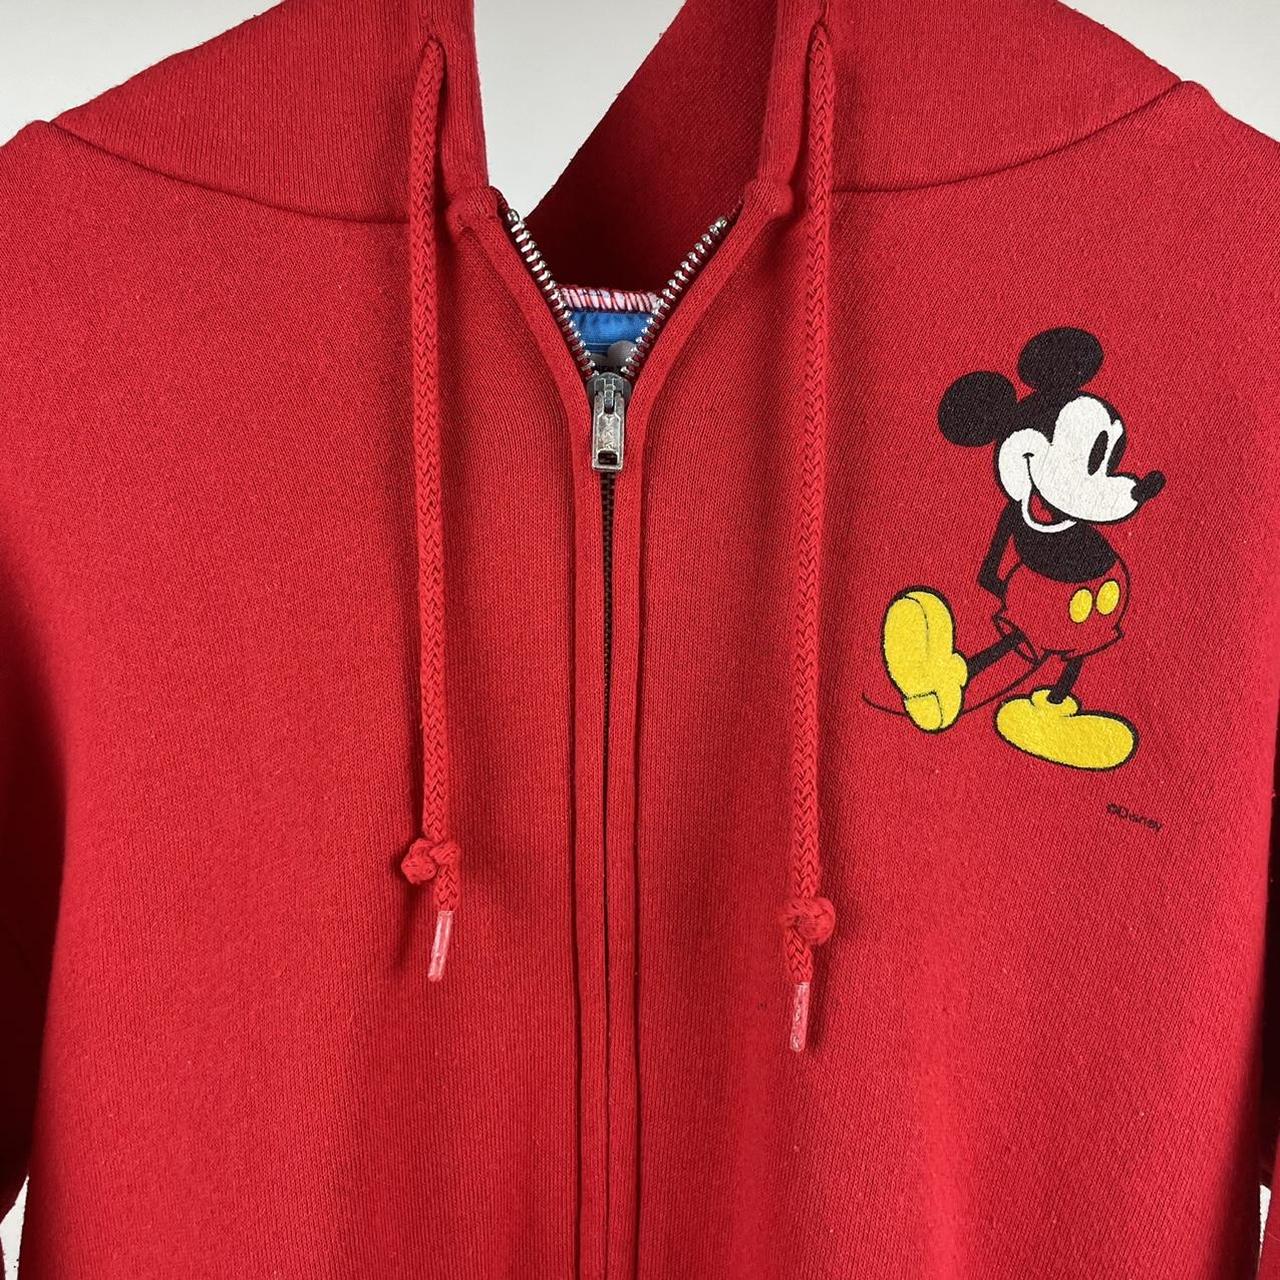 Product Image 3 - Mickey Mouse Disney Zip-up Hoodie

***